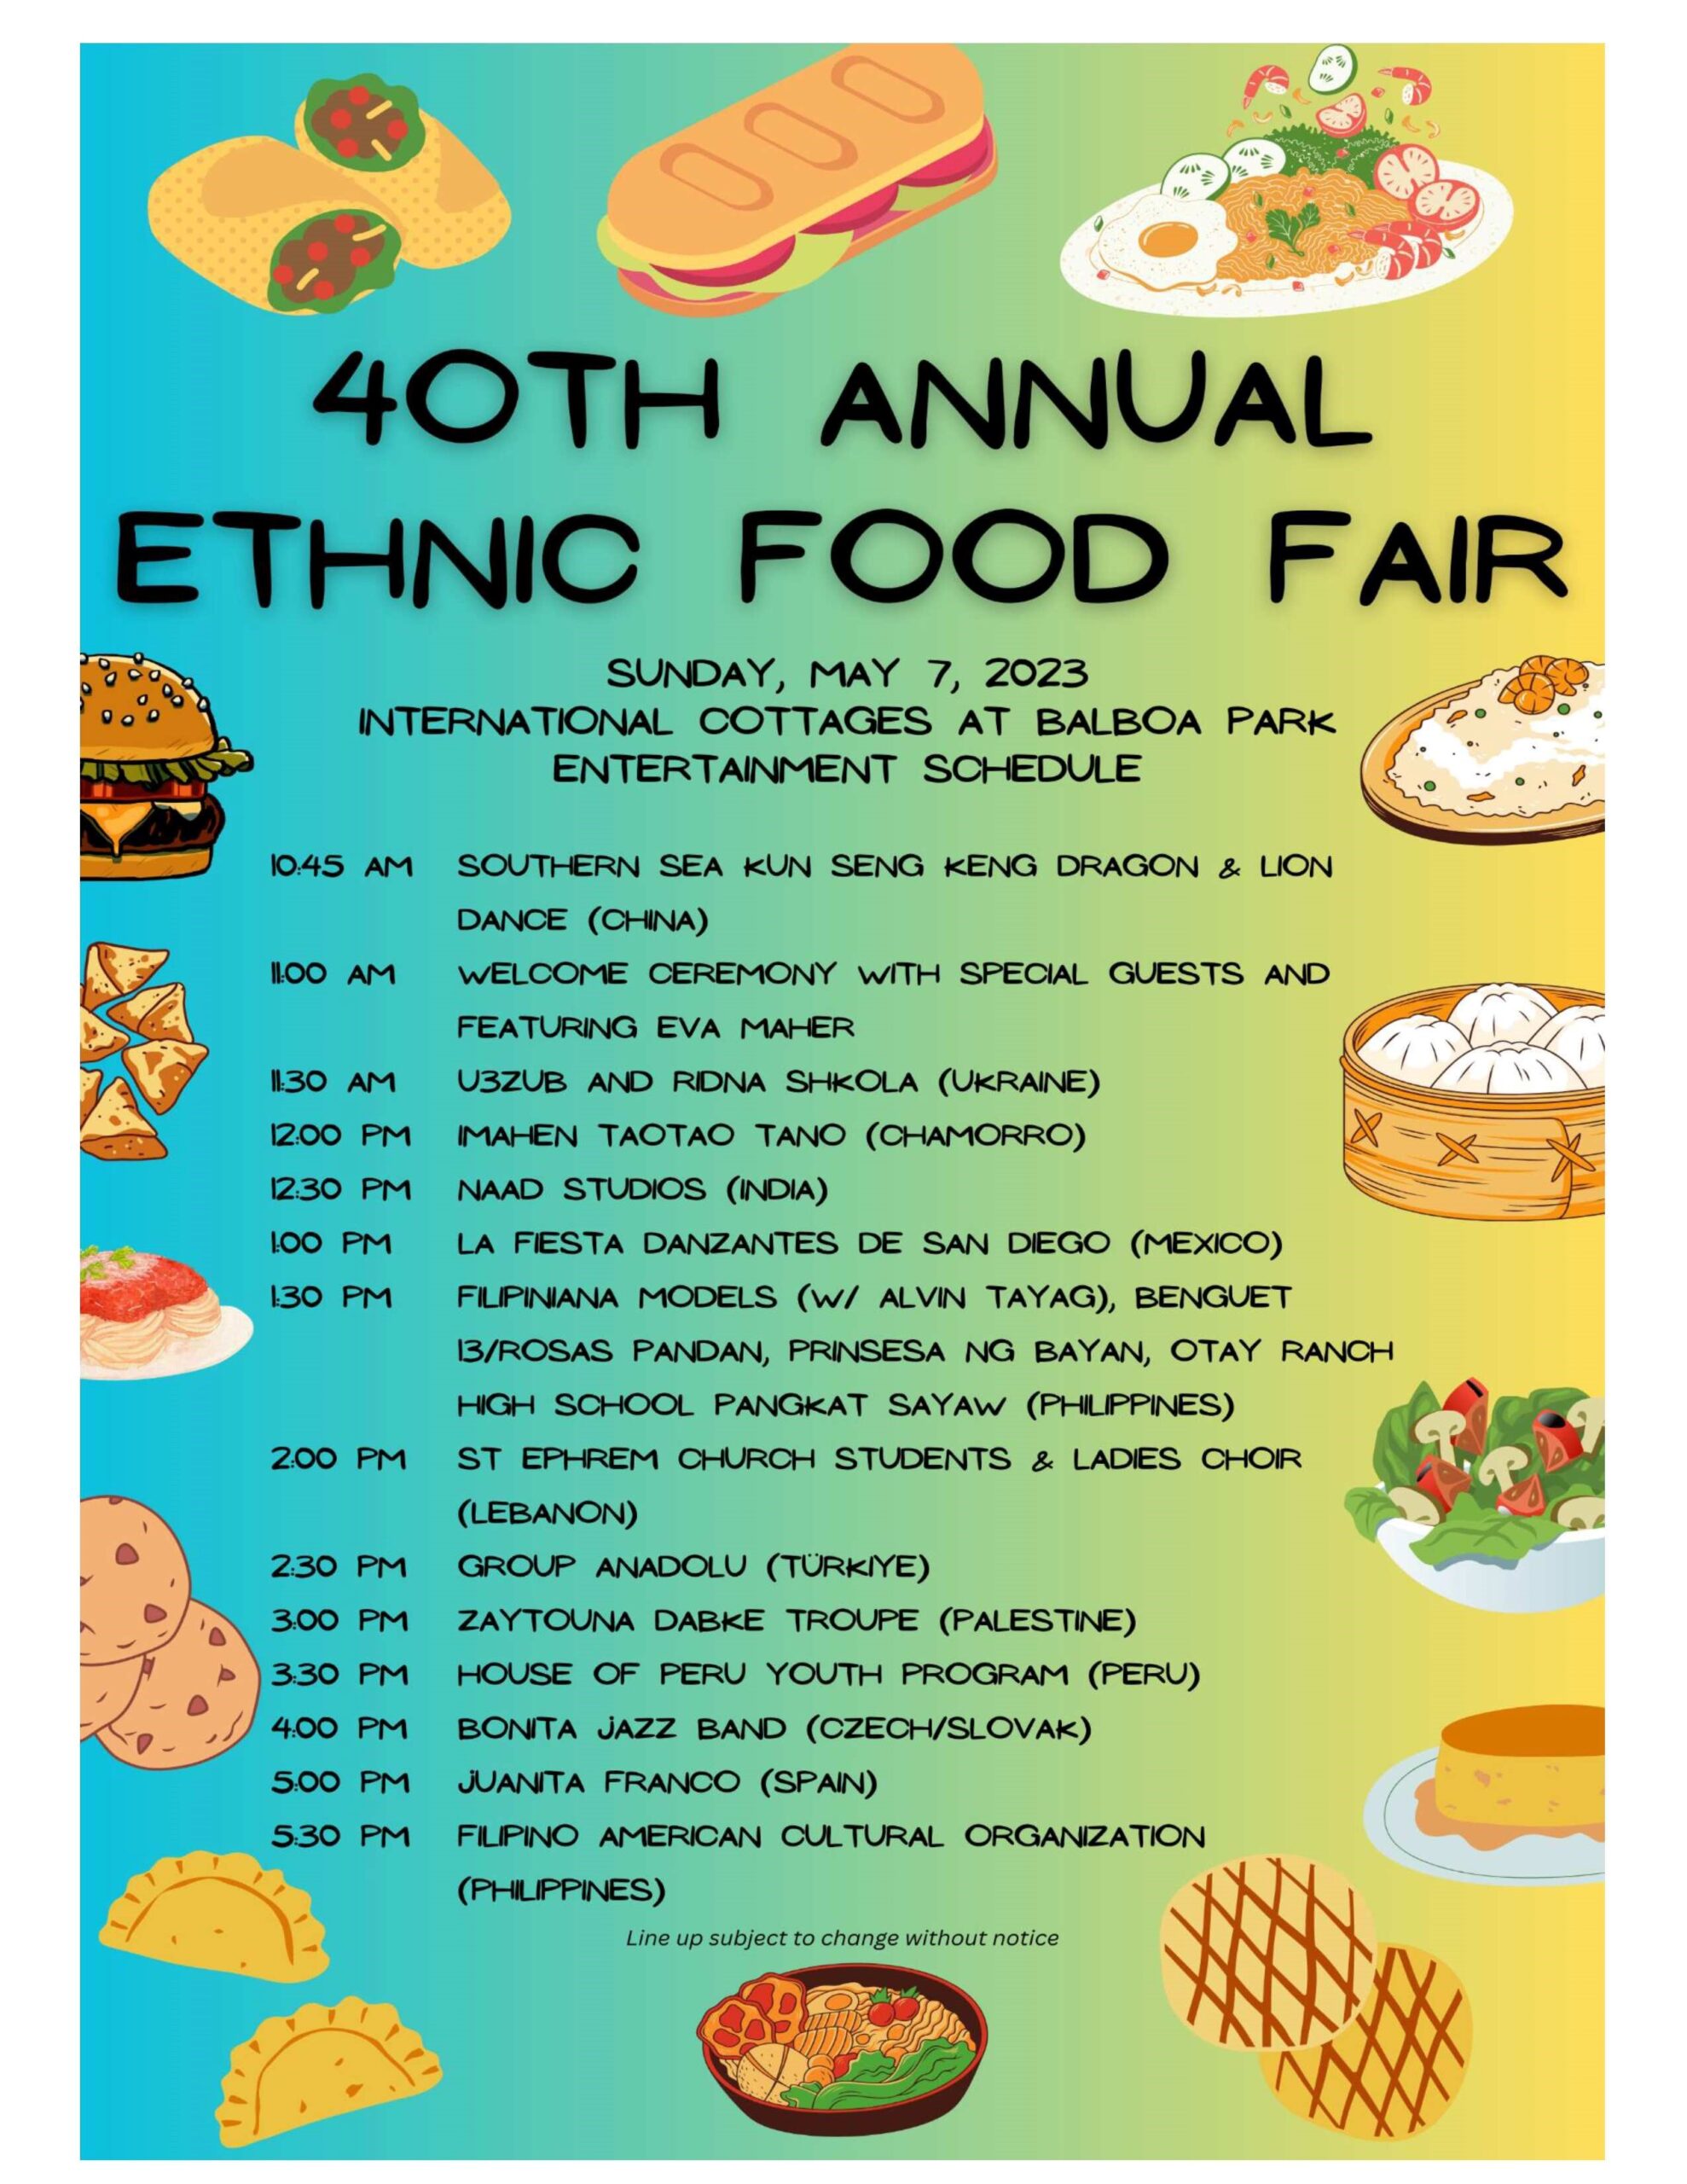 40th Annual Ethnic Food Fair - The House of Pacific Relations presents its 40th Annual Ethnic Food Fair with the International Cottages in Balboa Park.